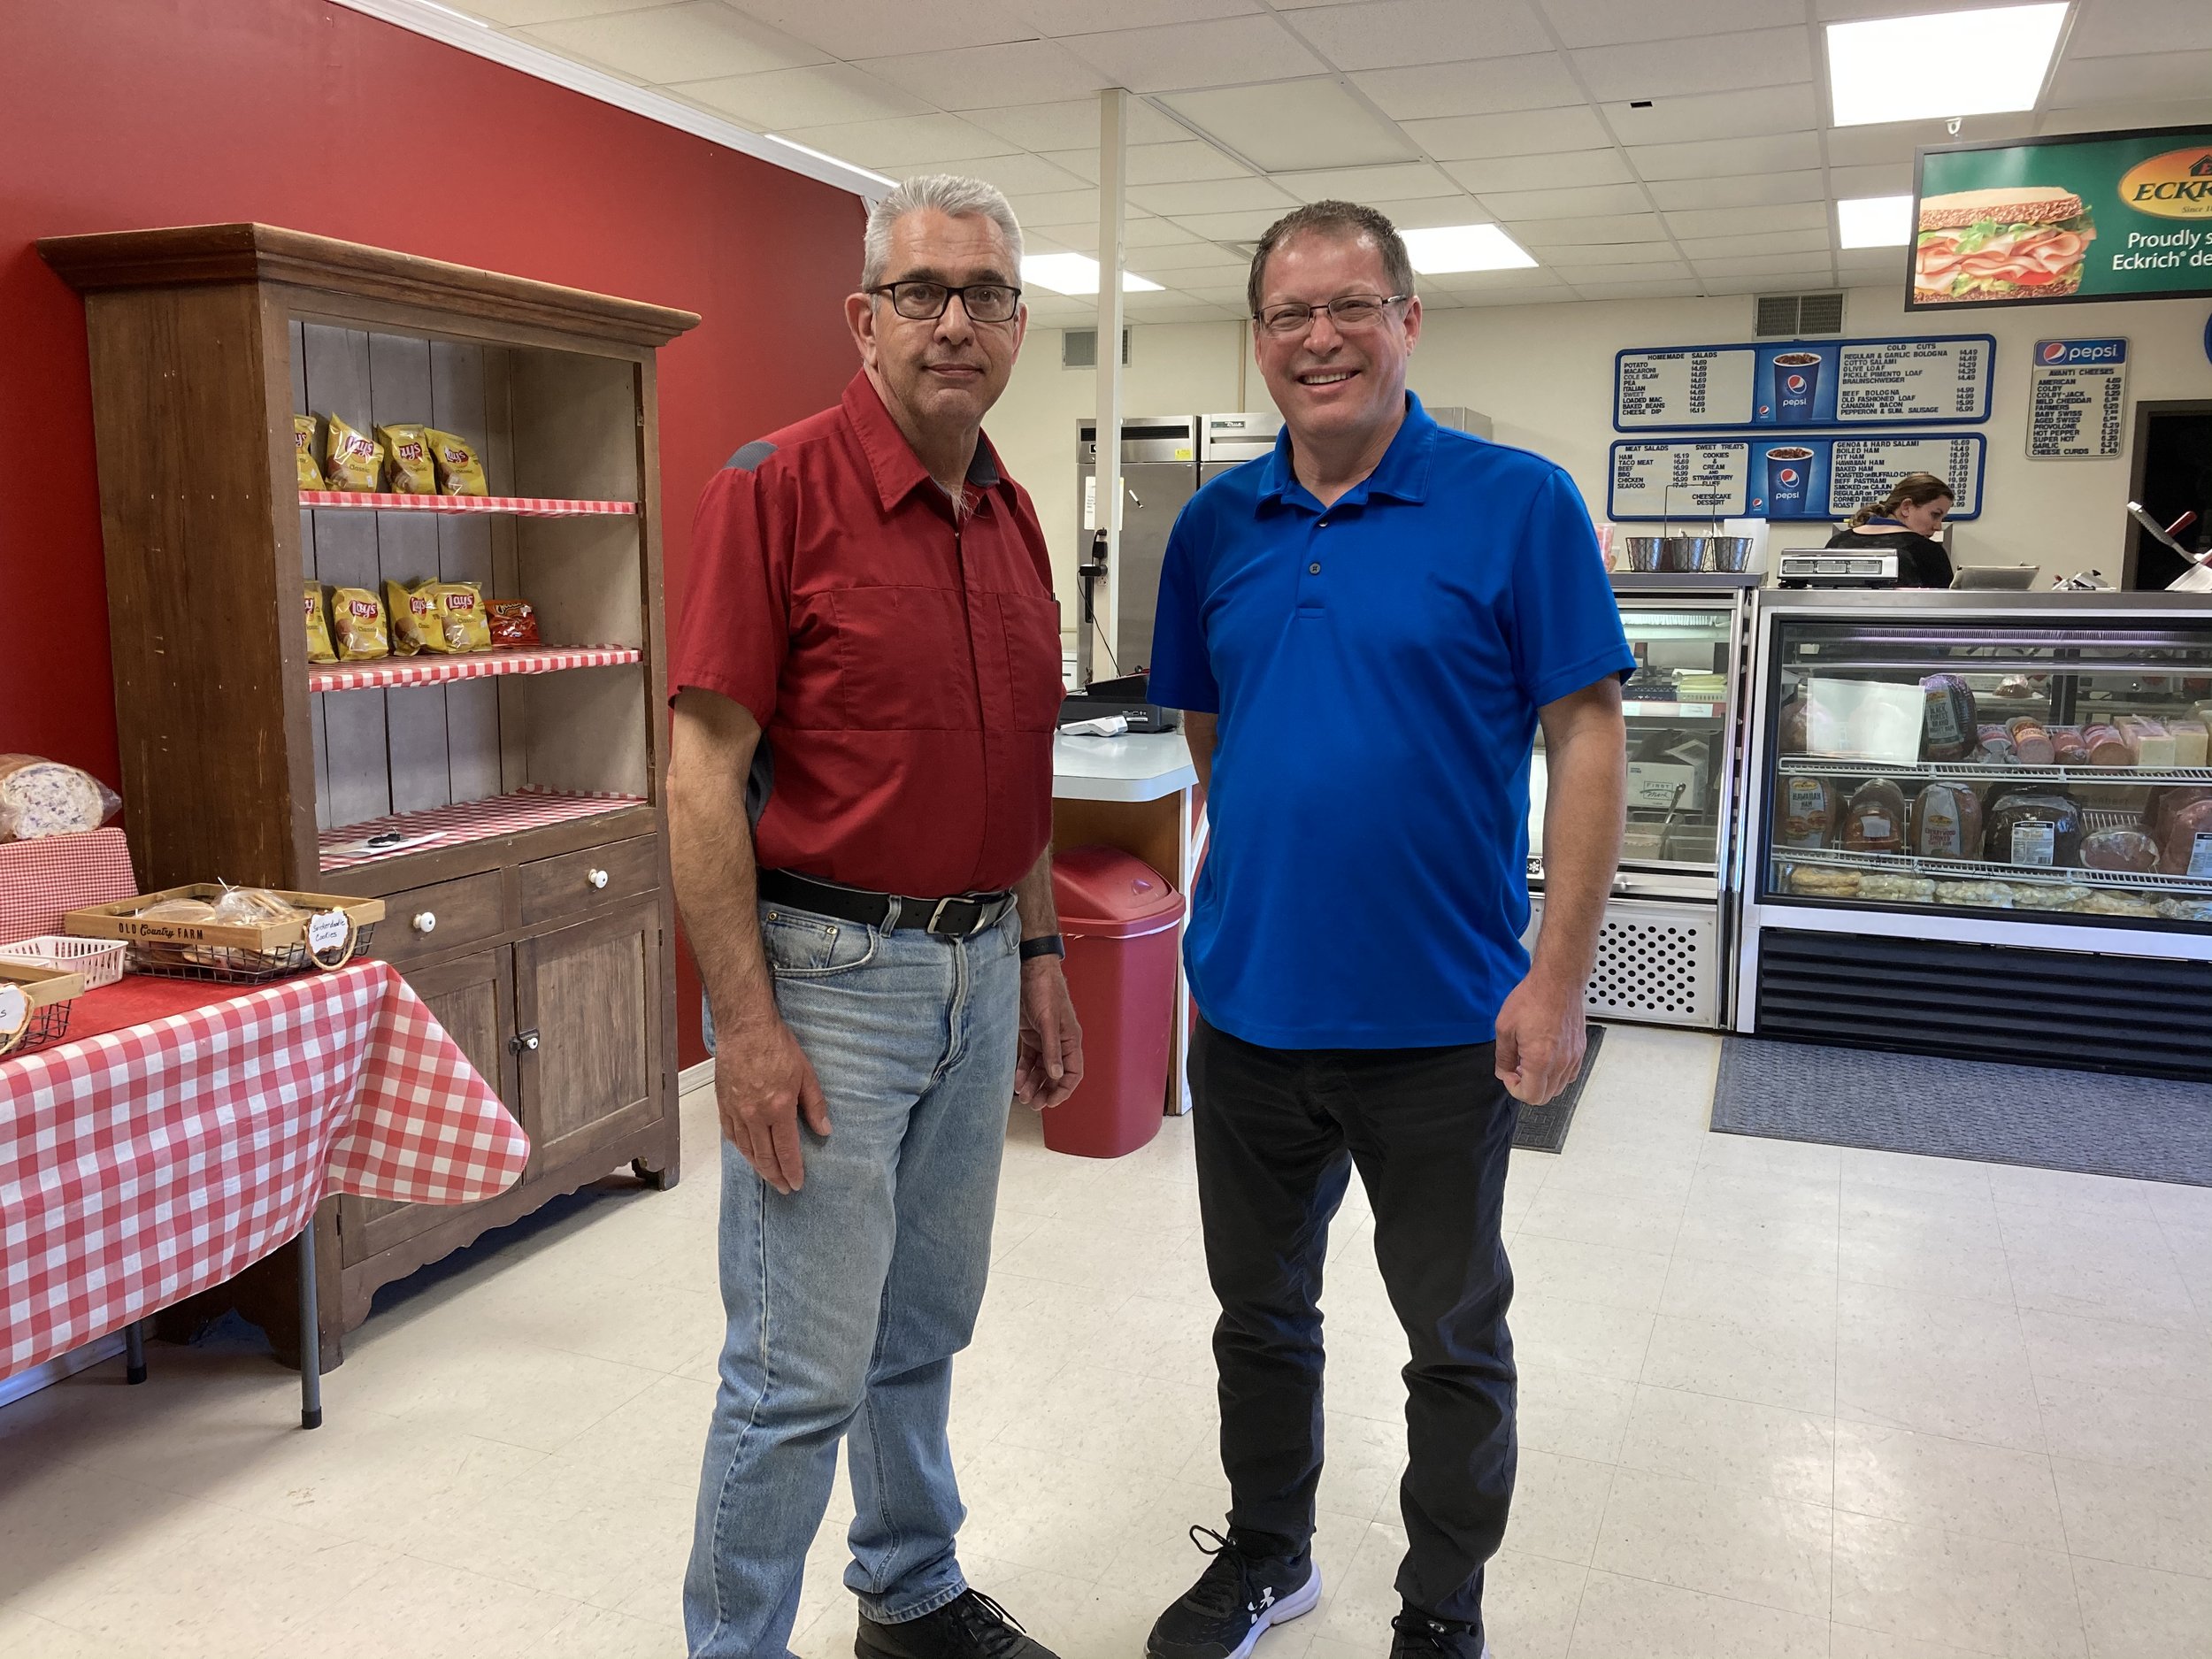 Gary's Deli Gets New Ownership